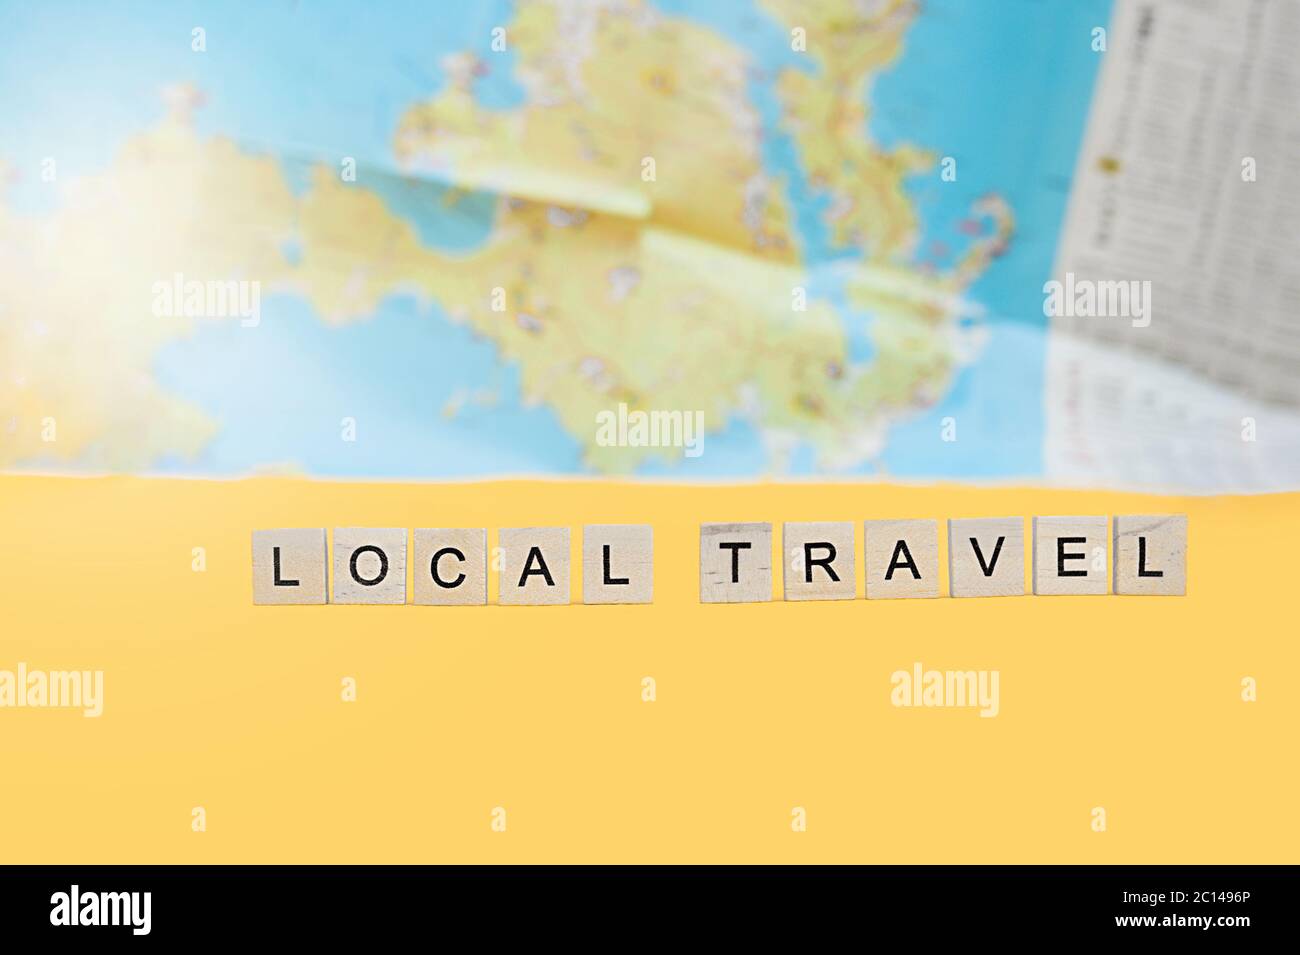 local travel lettering in square wooden letters on a bright yellow background and a map. relevant domestic tourism 2020 concept flatlay Stock Photo